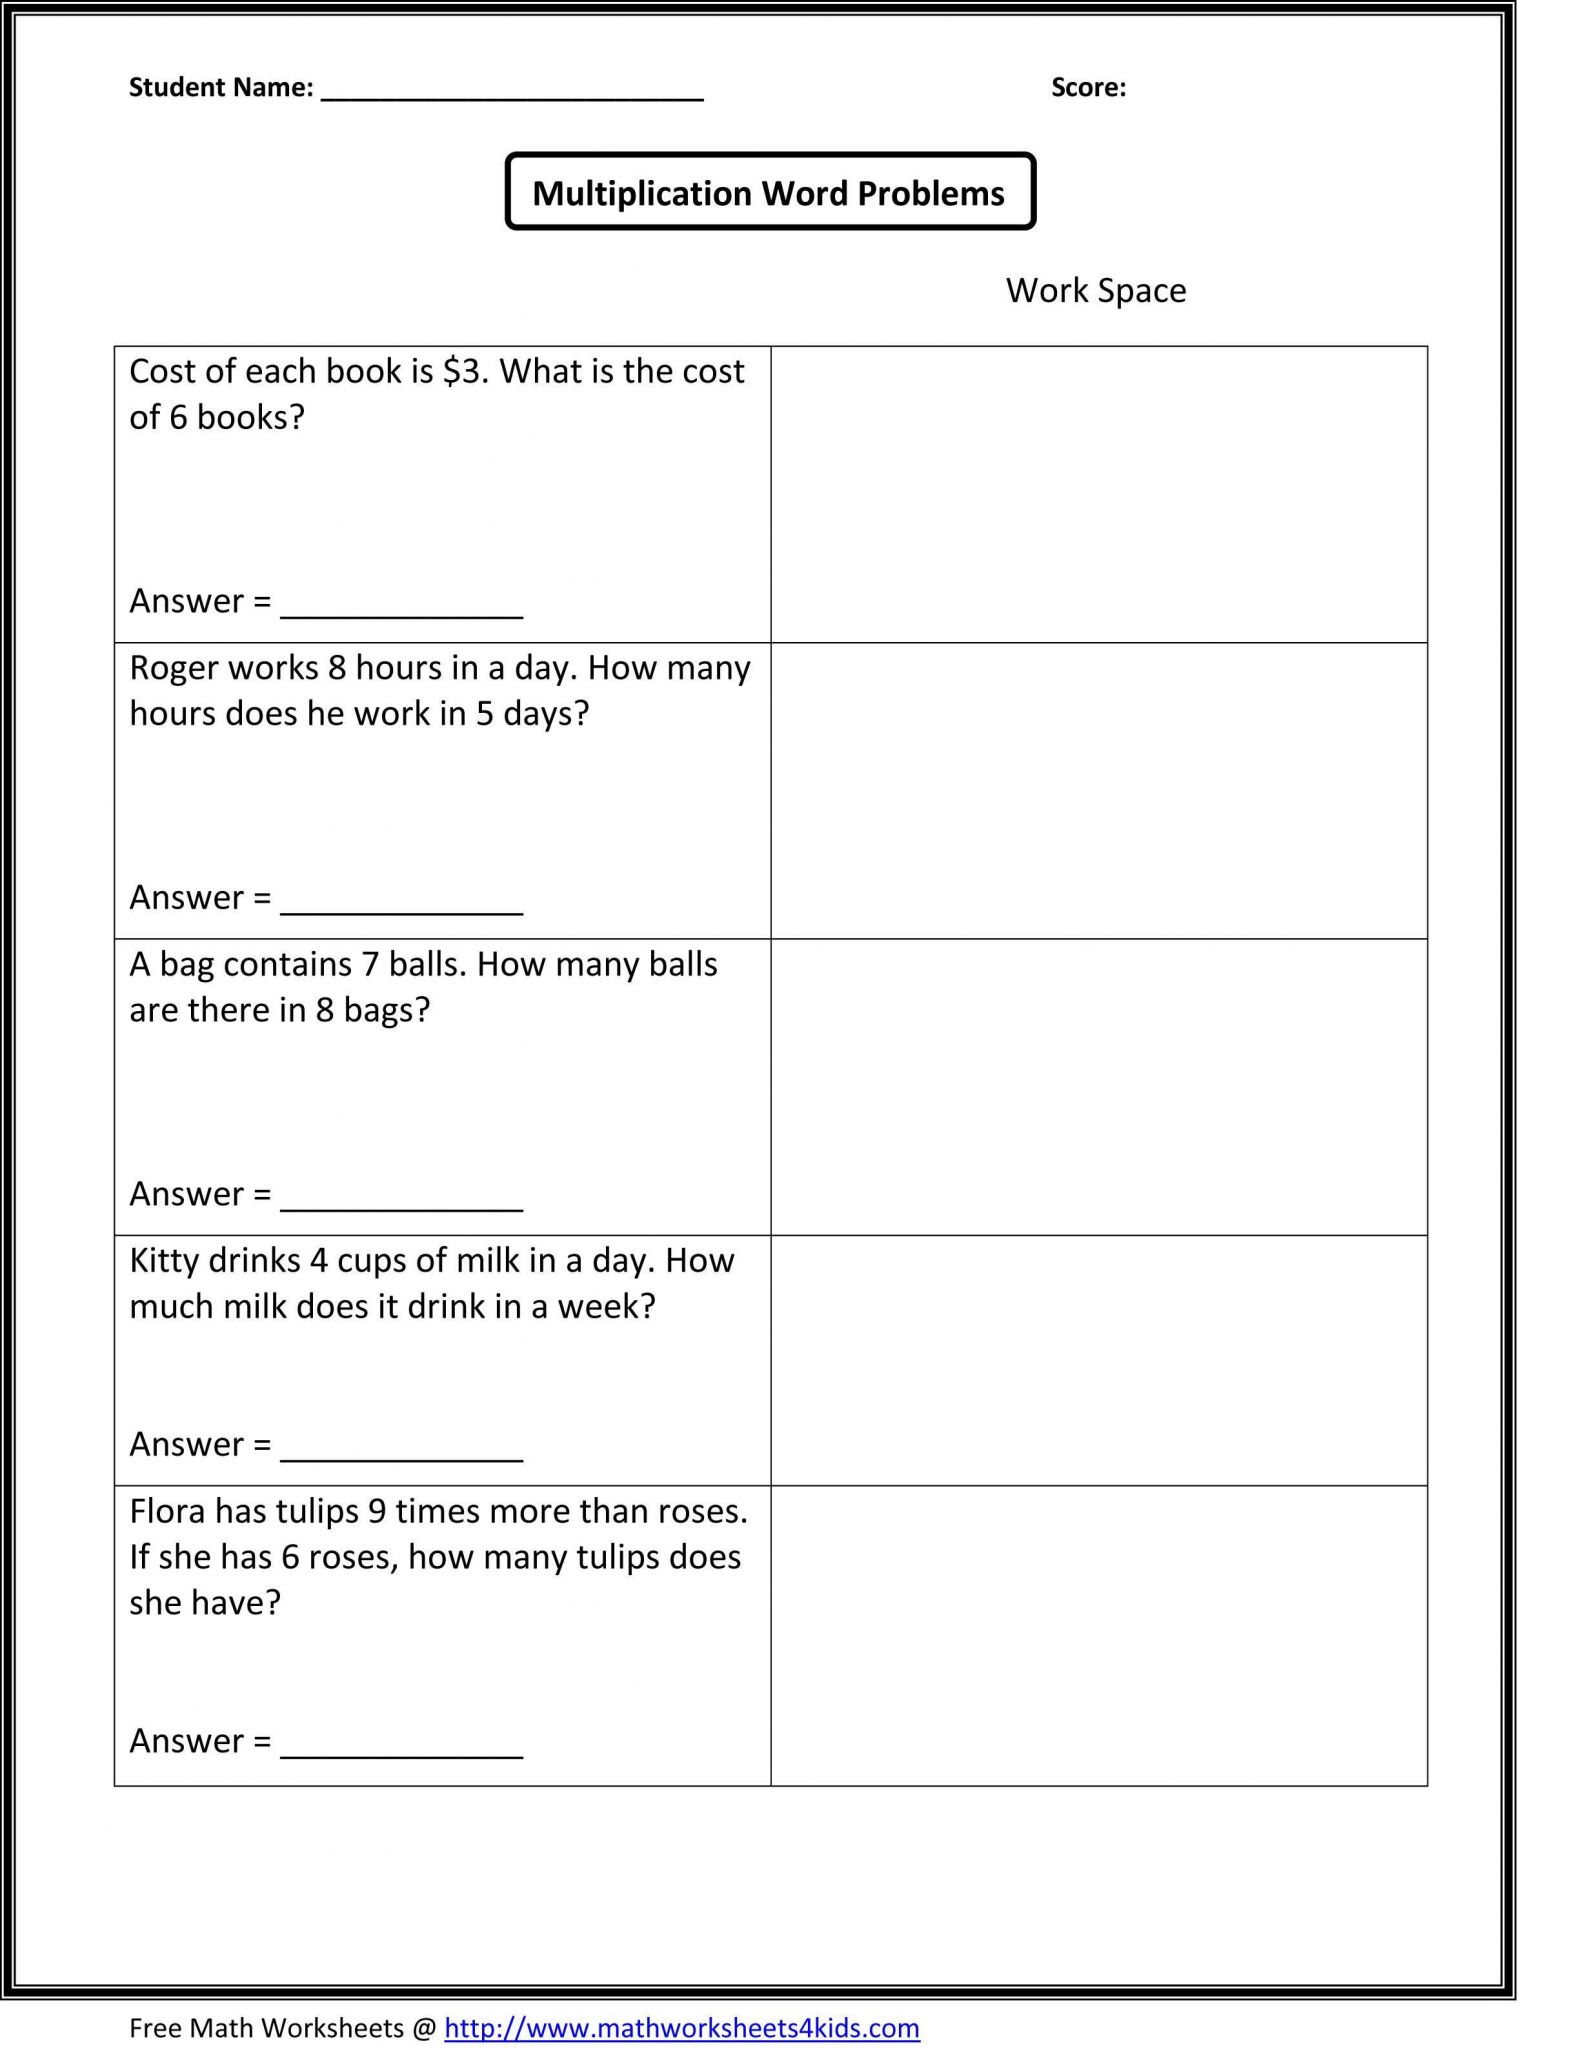 Subtracting Integers Worksheet Also Adding and Subtracting Decimals Word Problems Worksheets Gallery